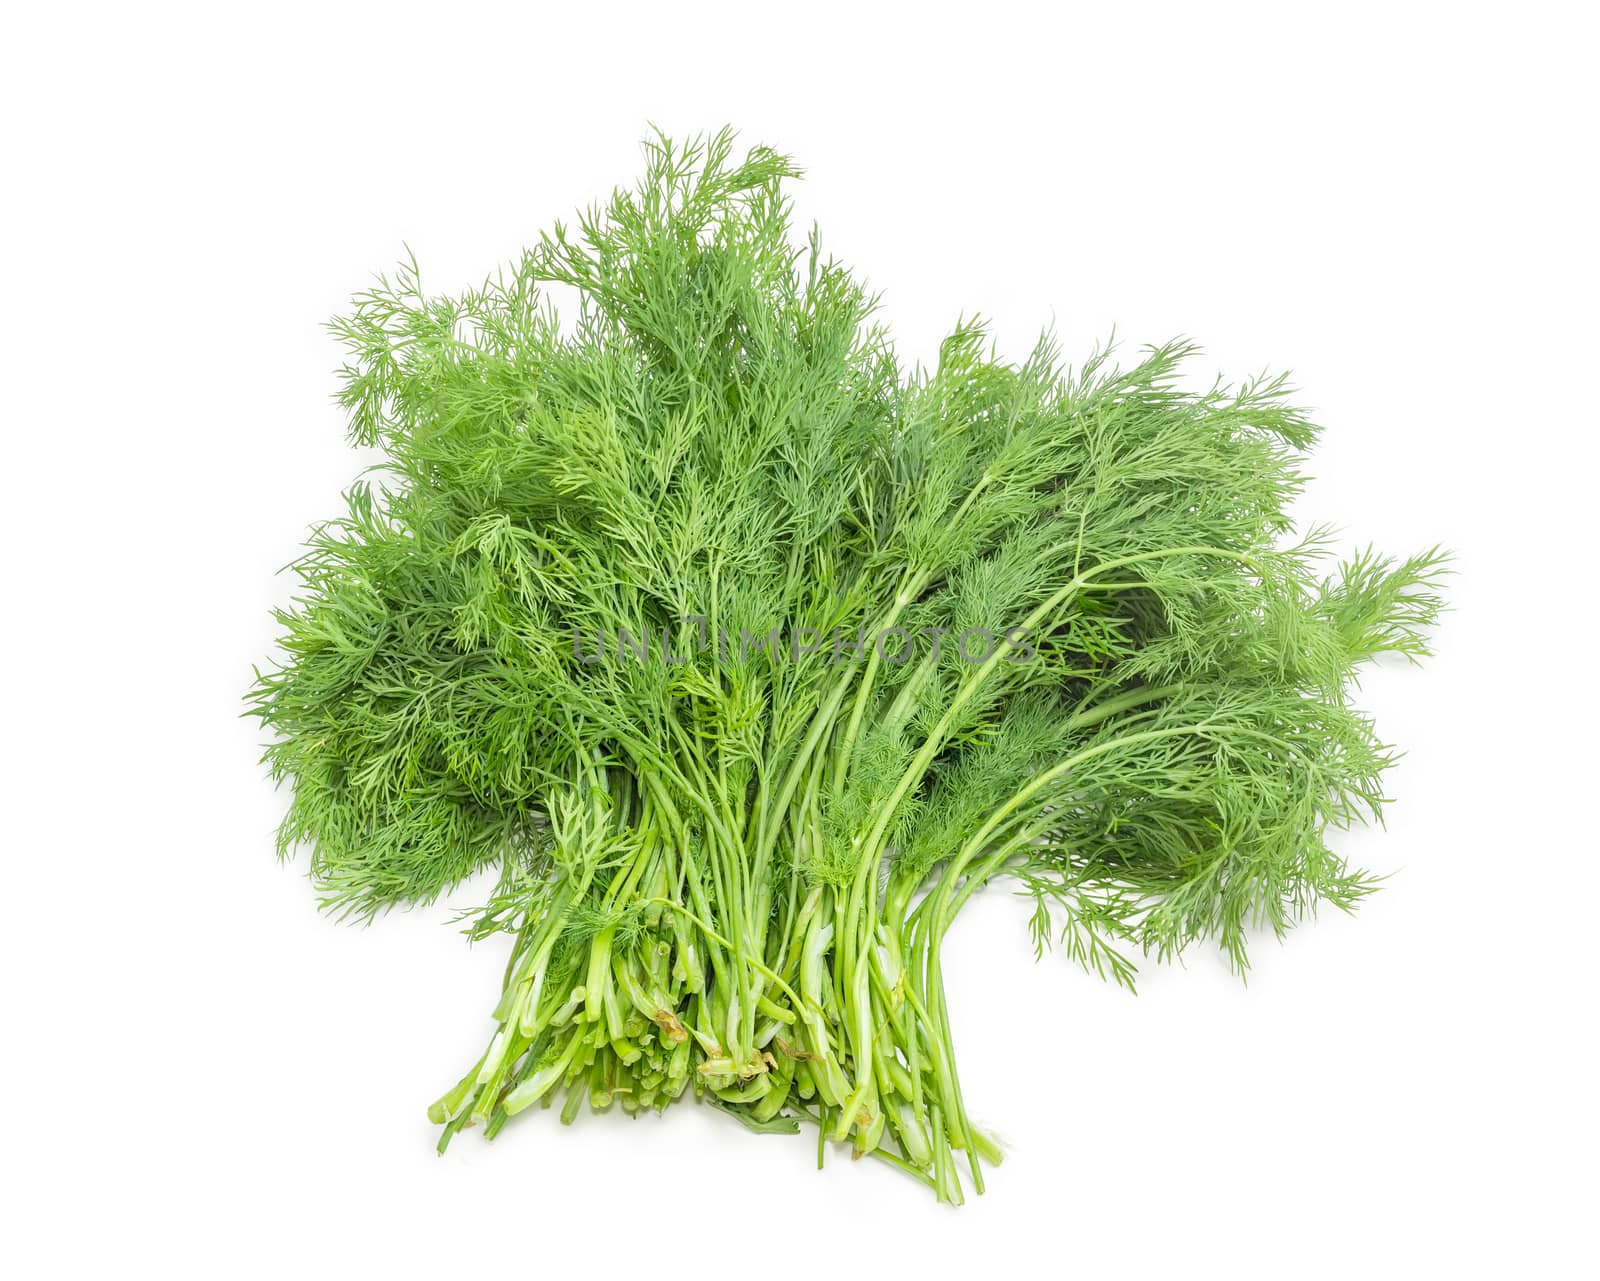 Bundle of dill on a white background by anmbph